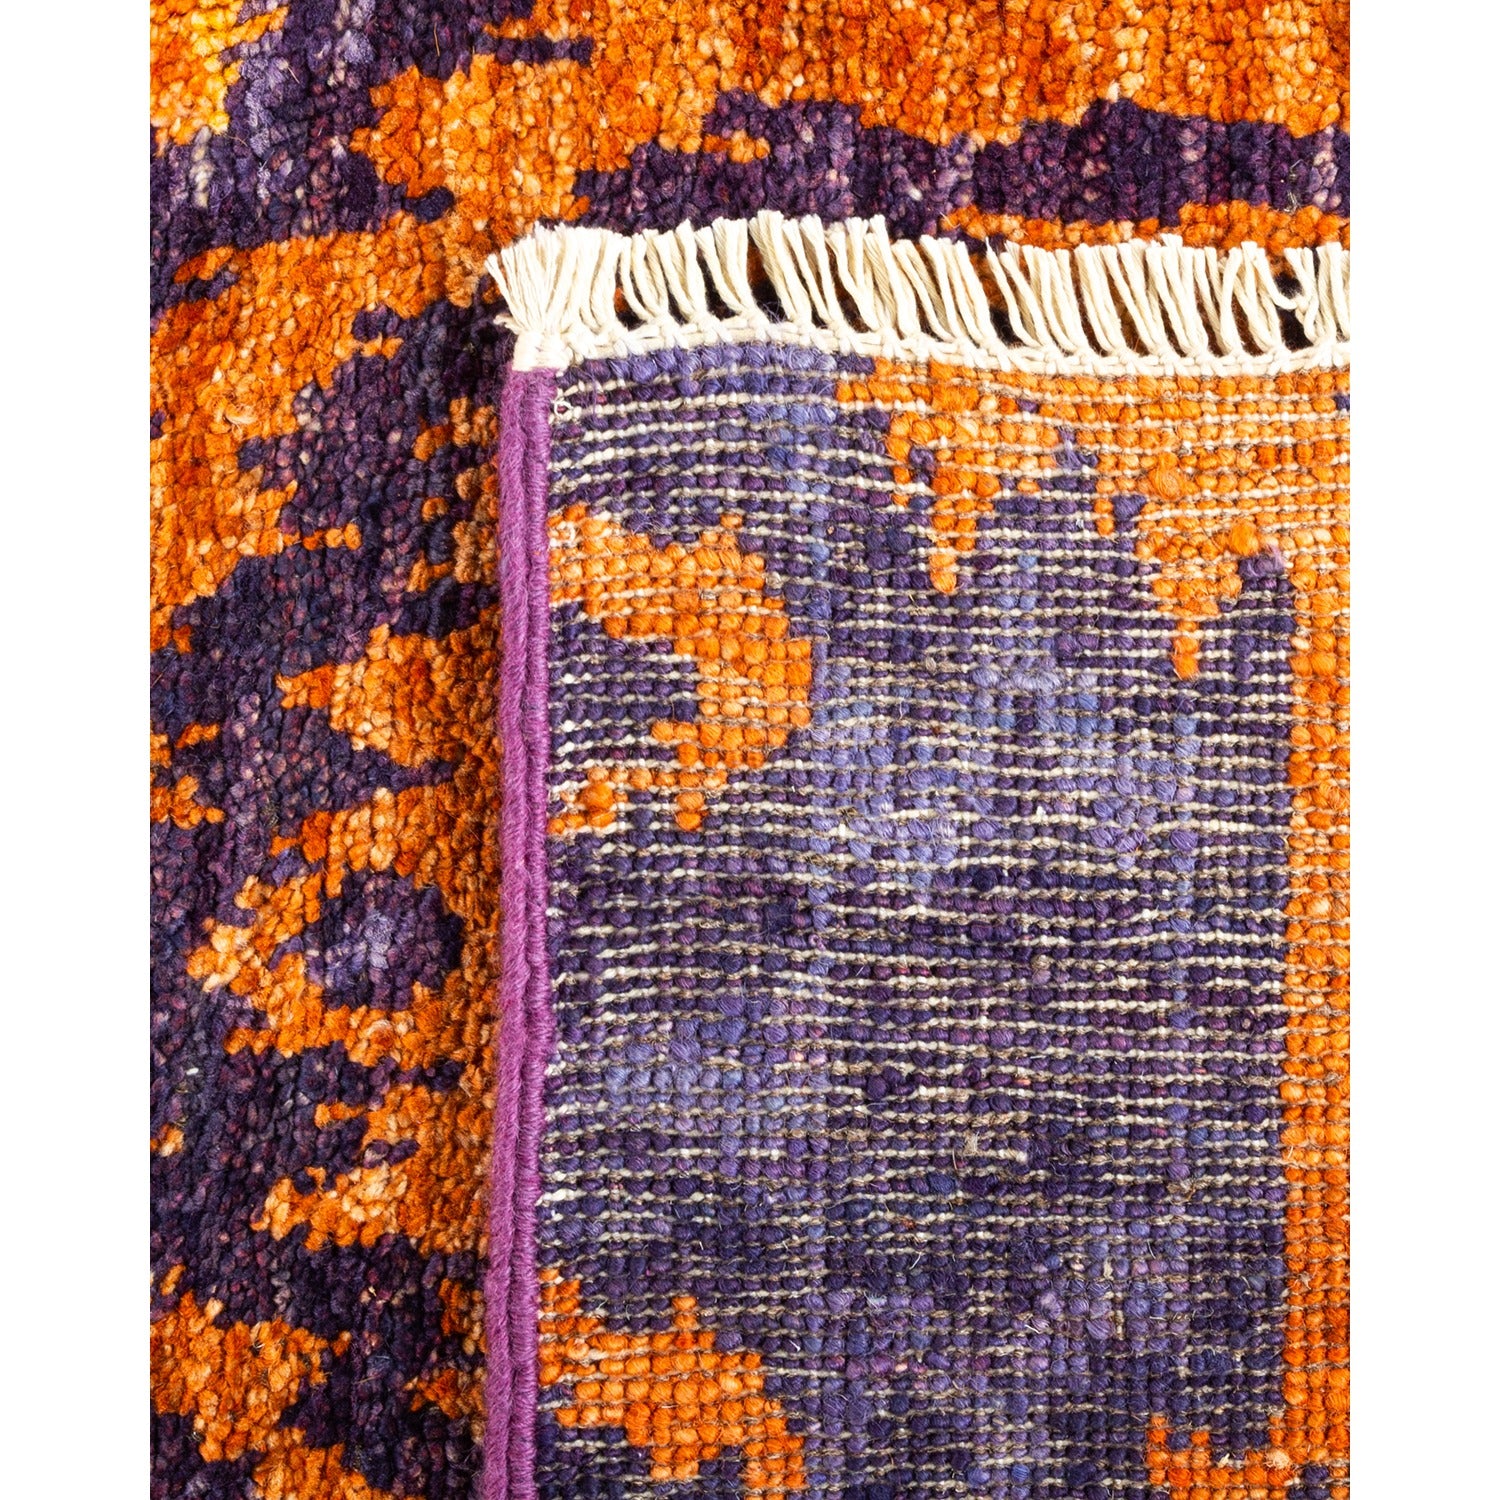 Close-up of vibrant patterned fabric with handmade textured weave.